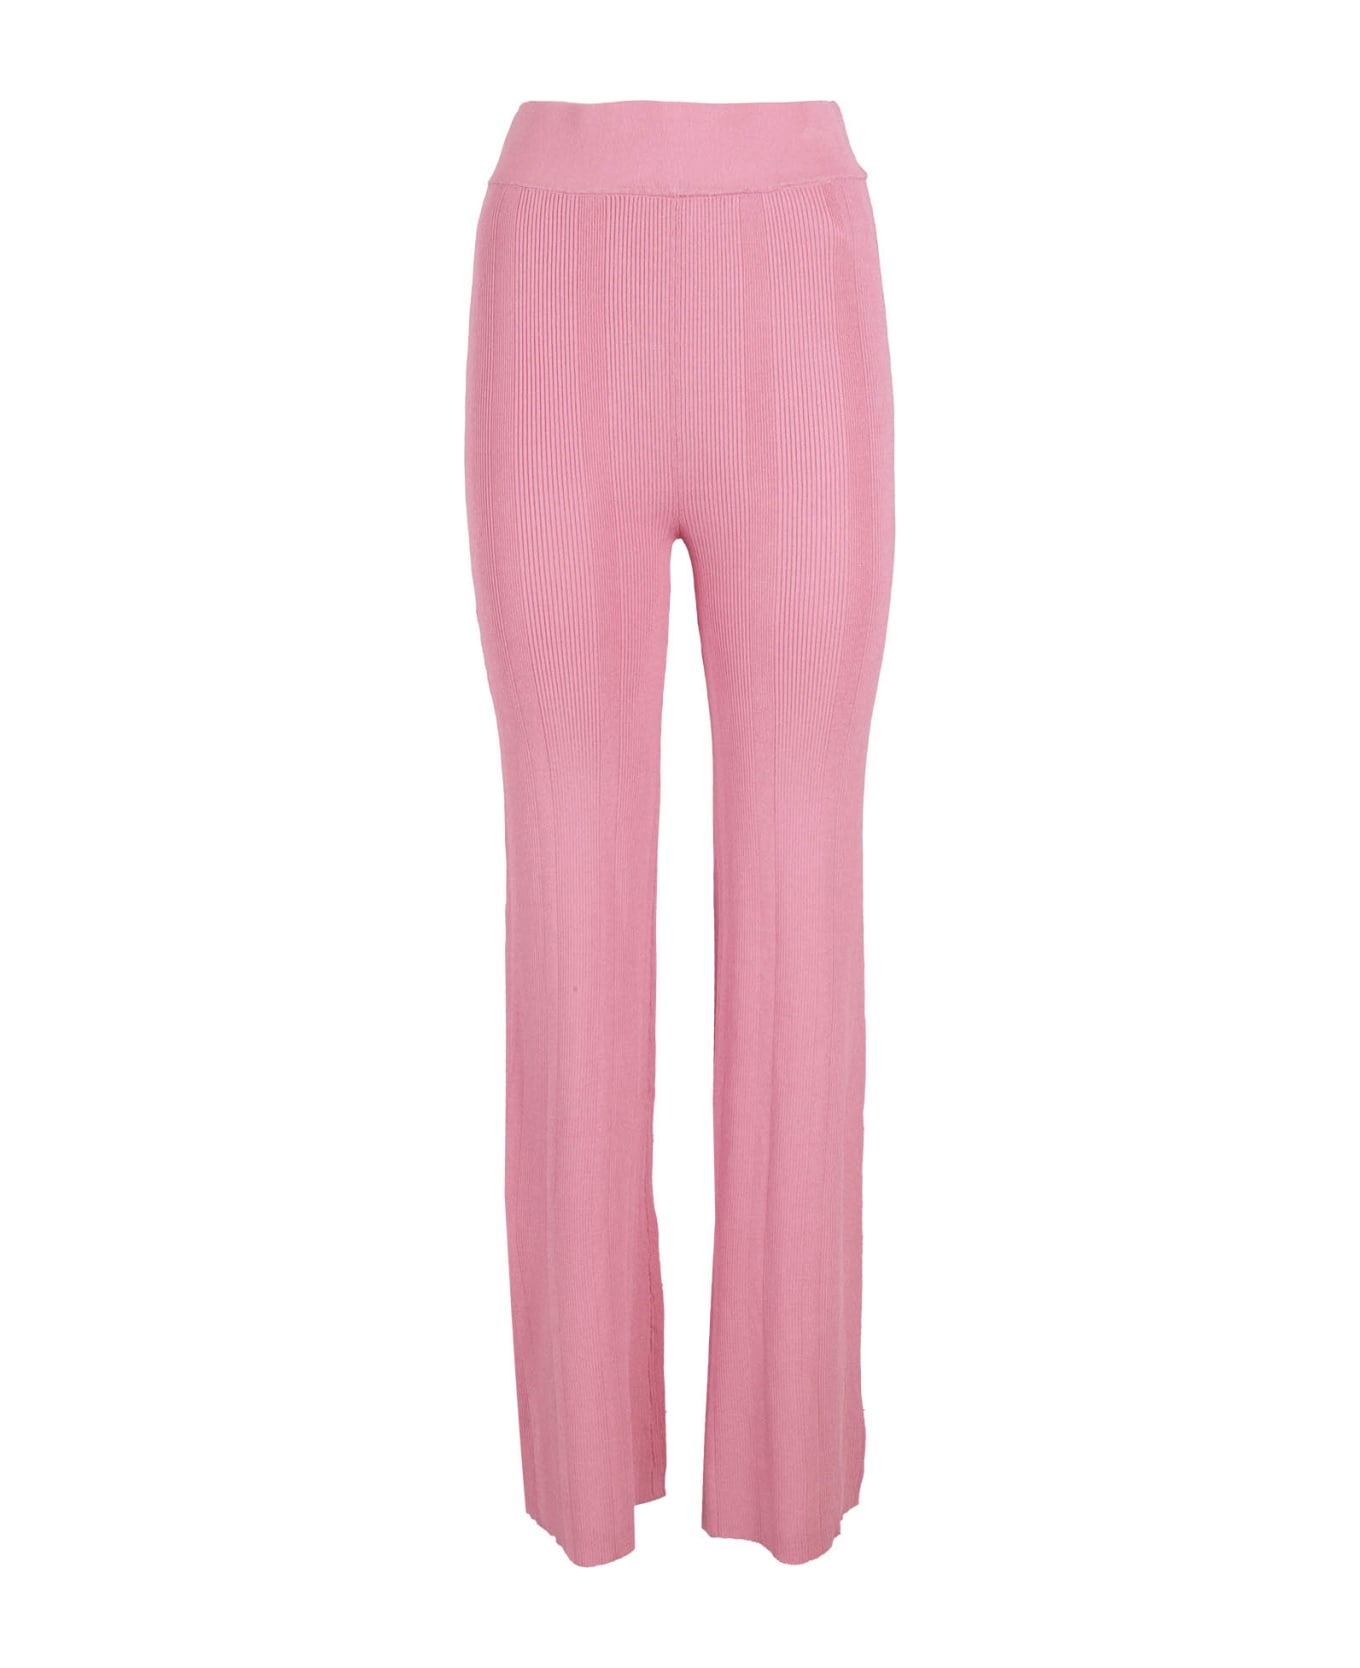 REMAIN Birger Christensen Ribbed Knit Straight Pant - Cashmere Rose